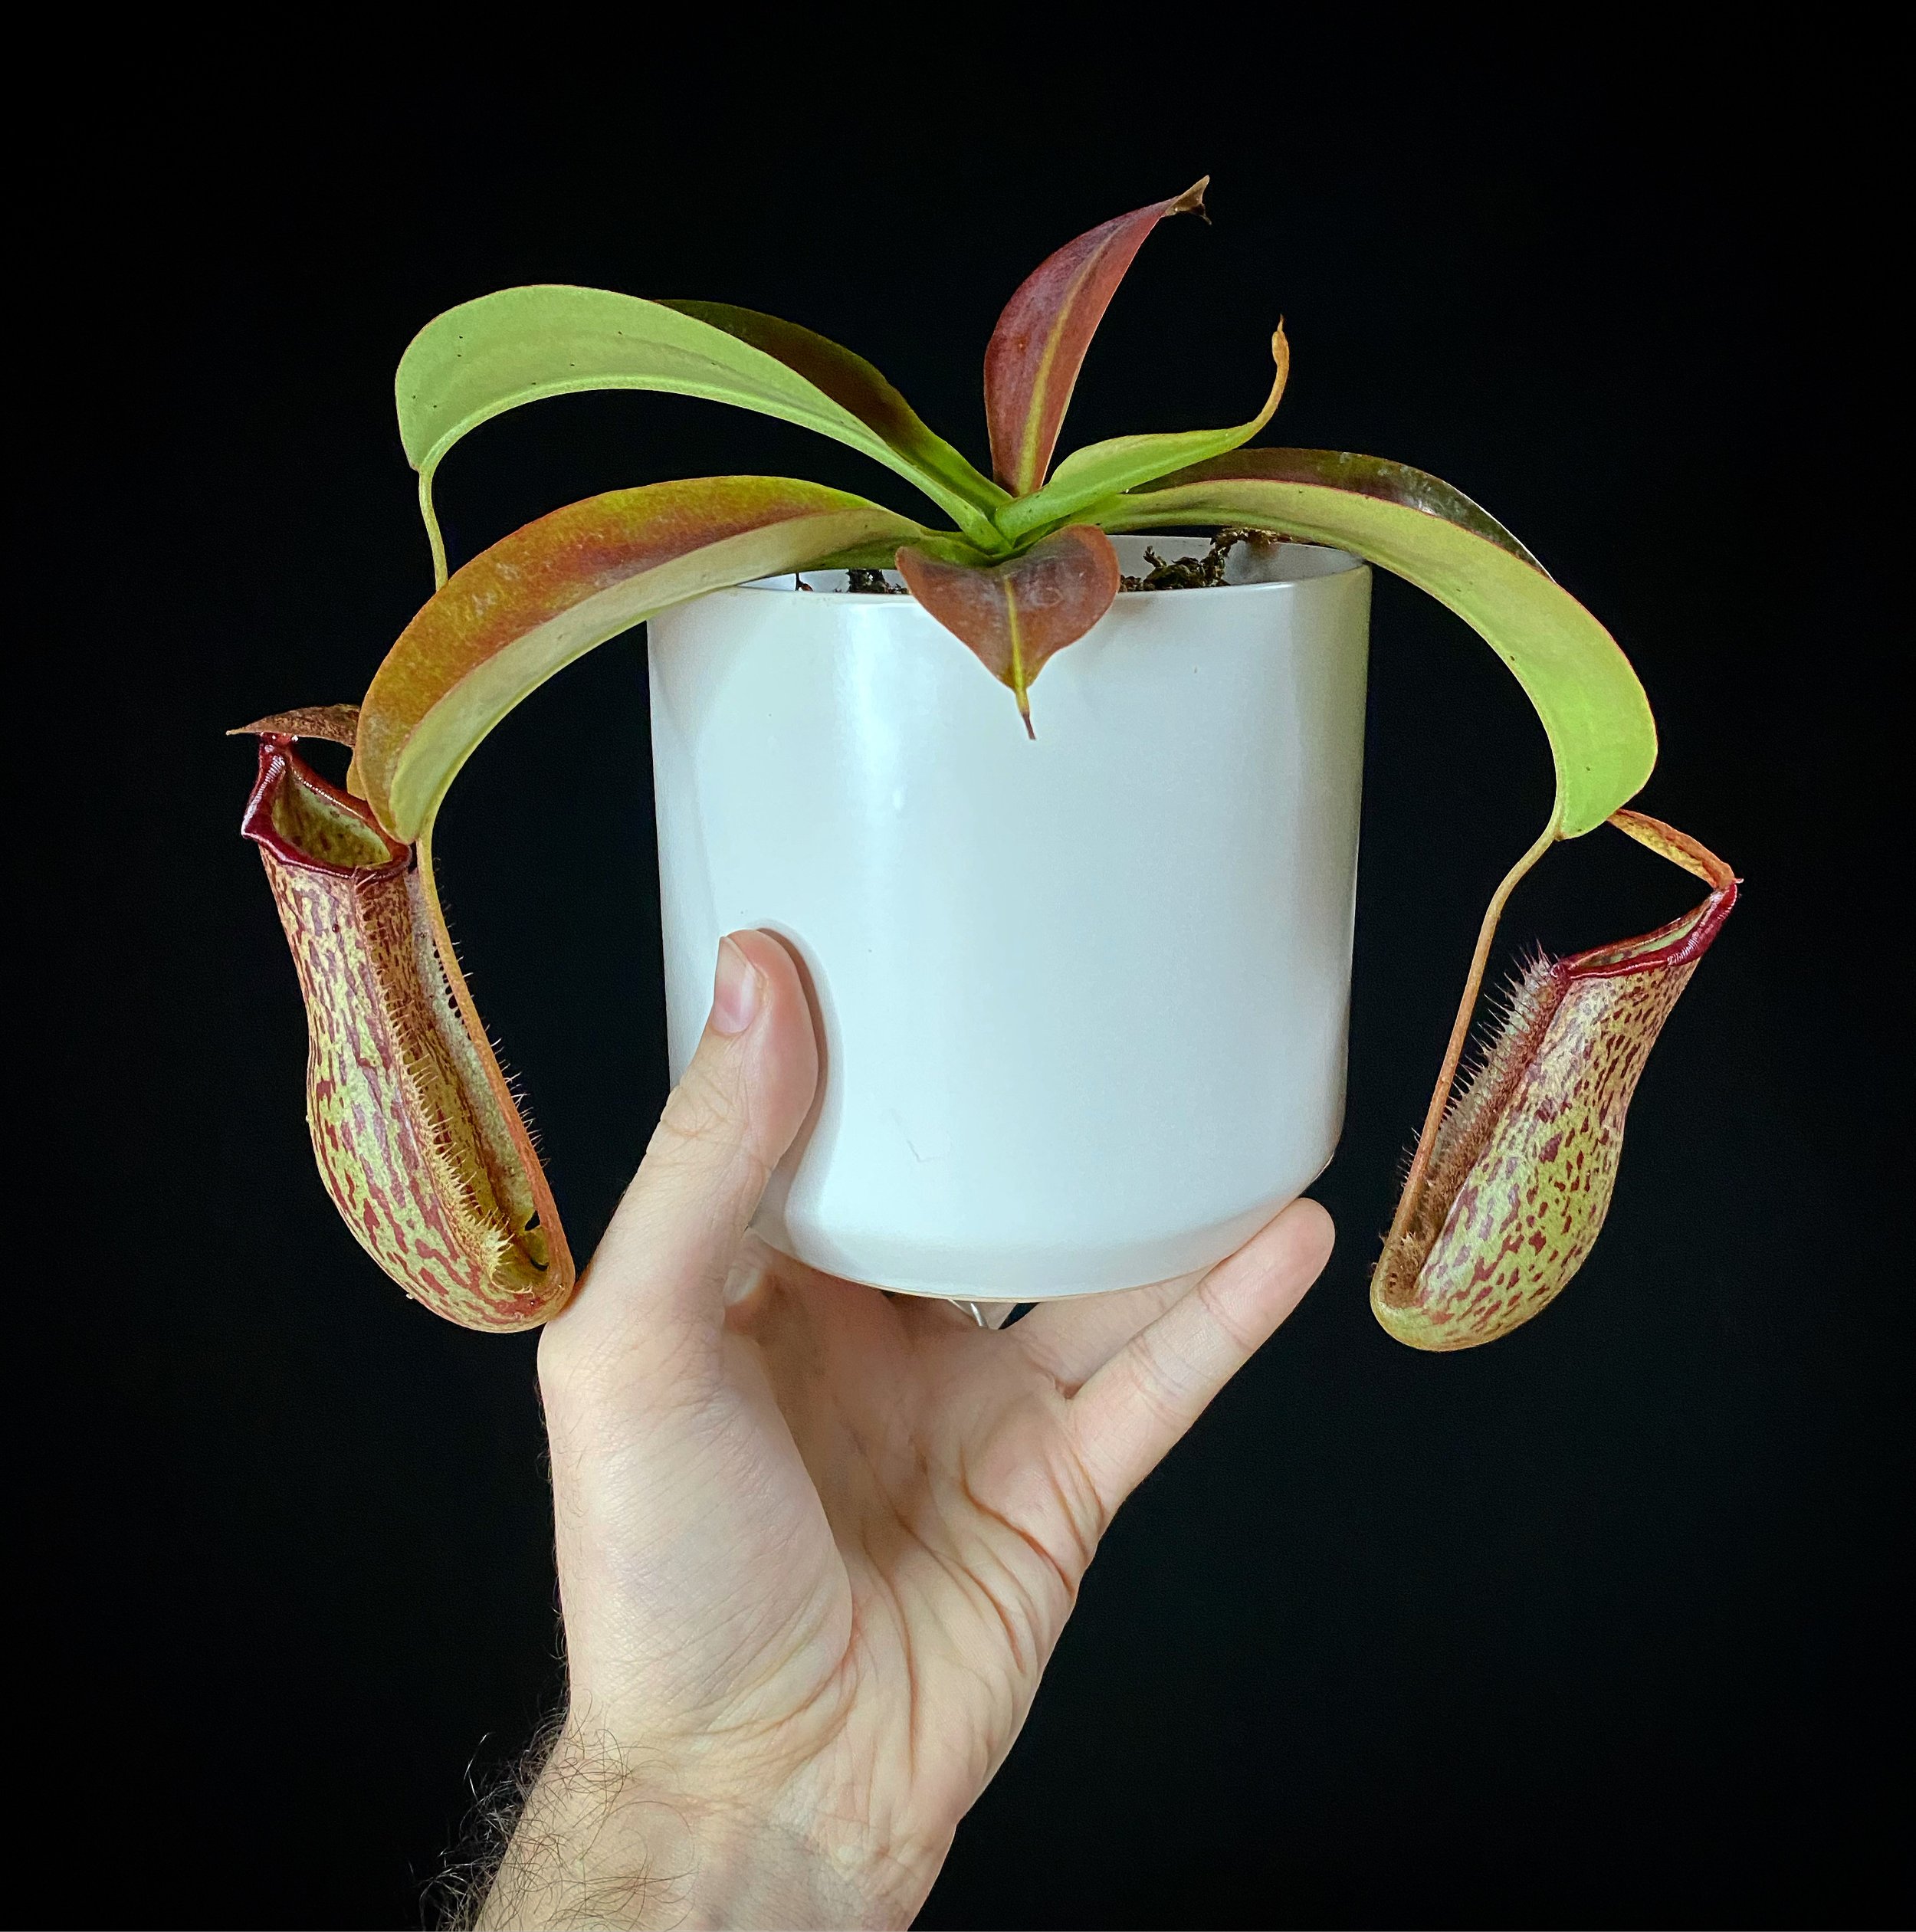 Nepenthes_14.jpg